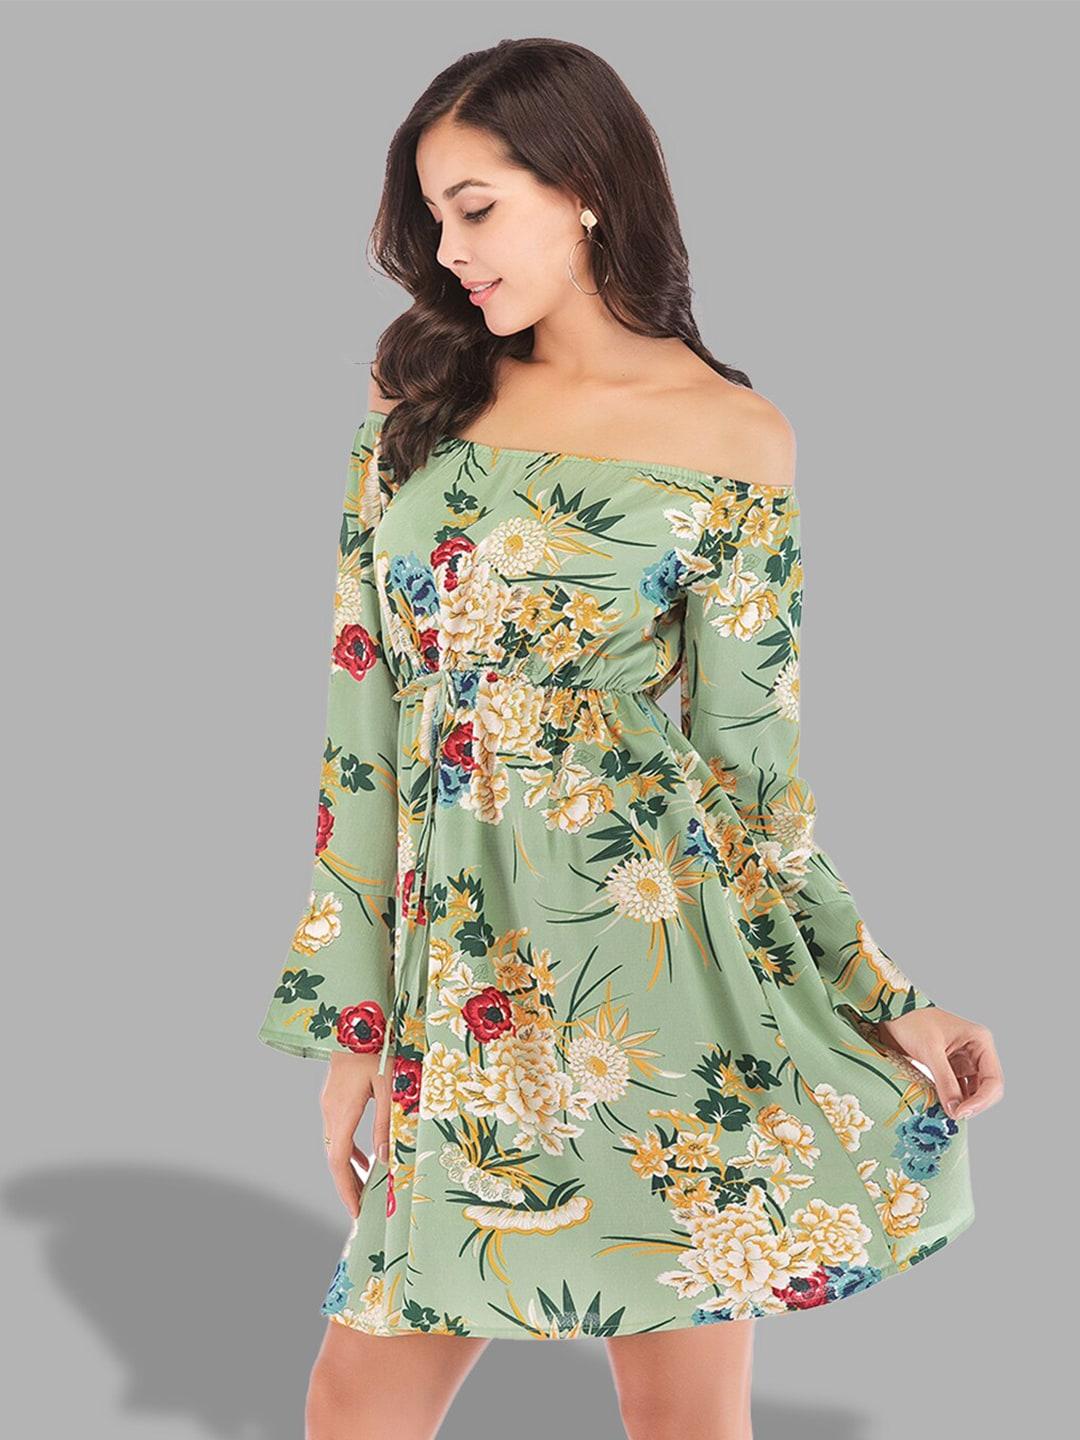 jc collection women green floral printed off-shoulder empire dress